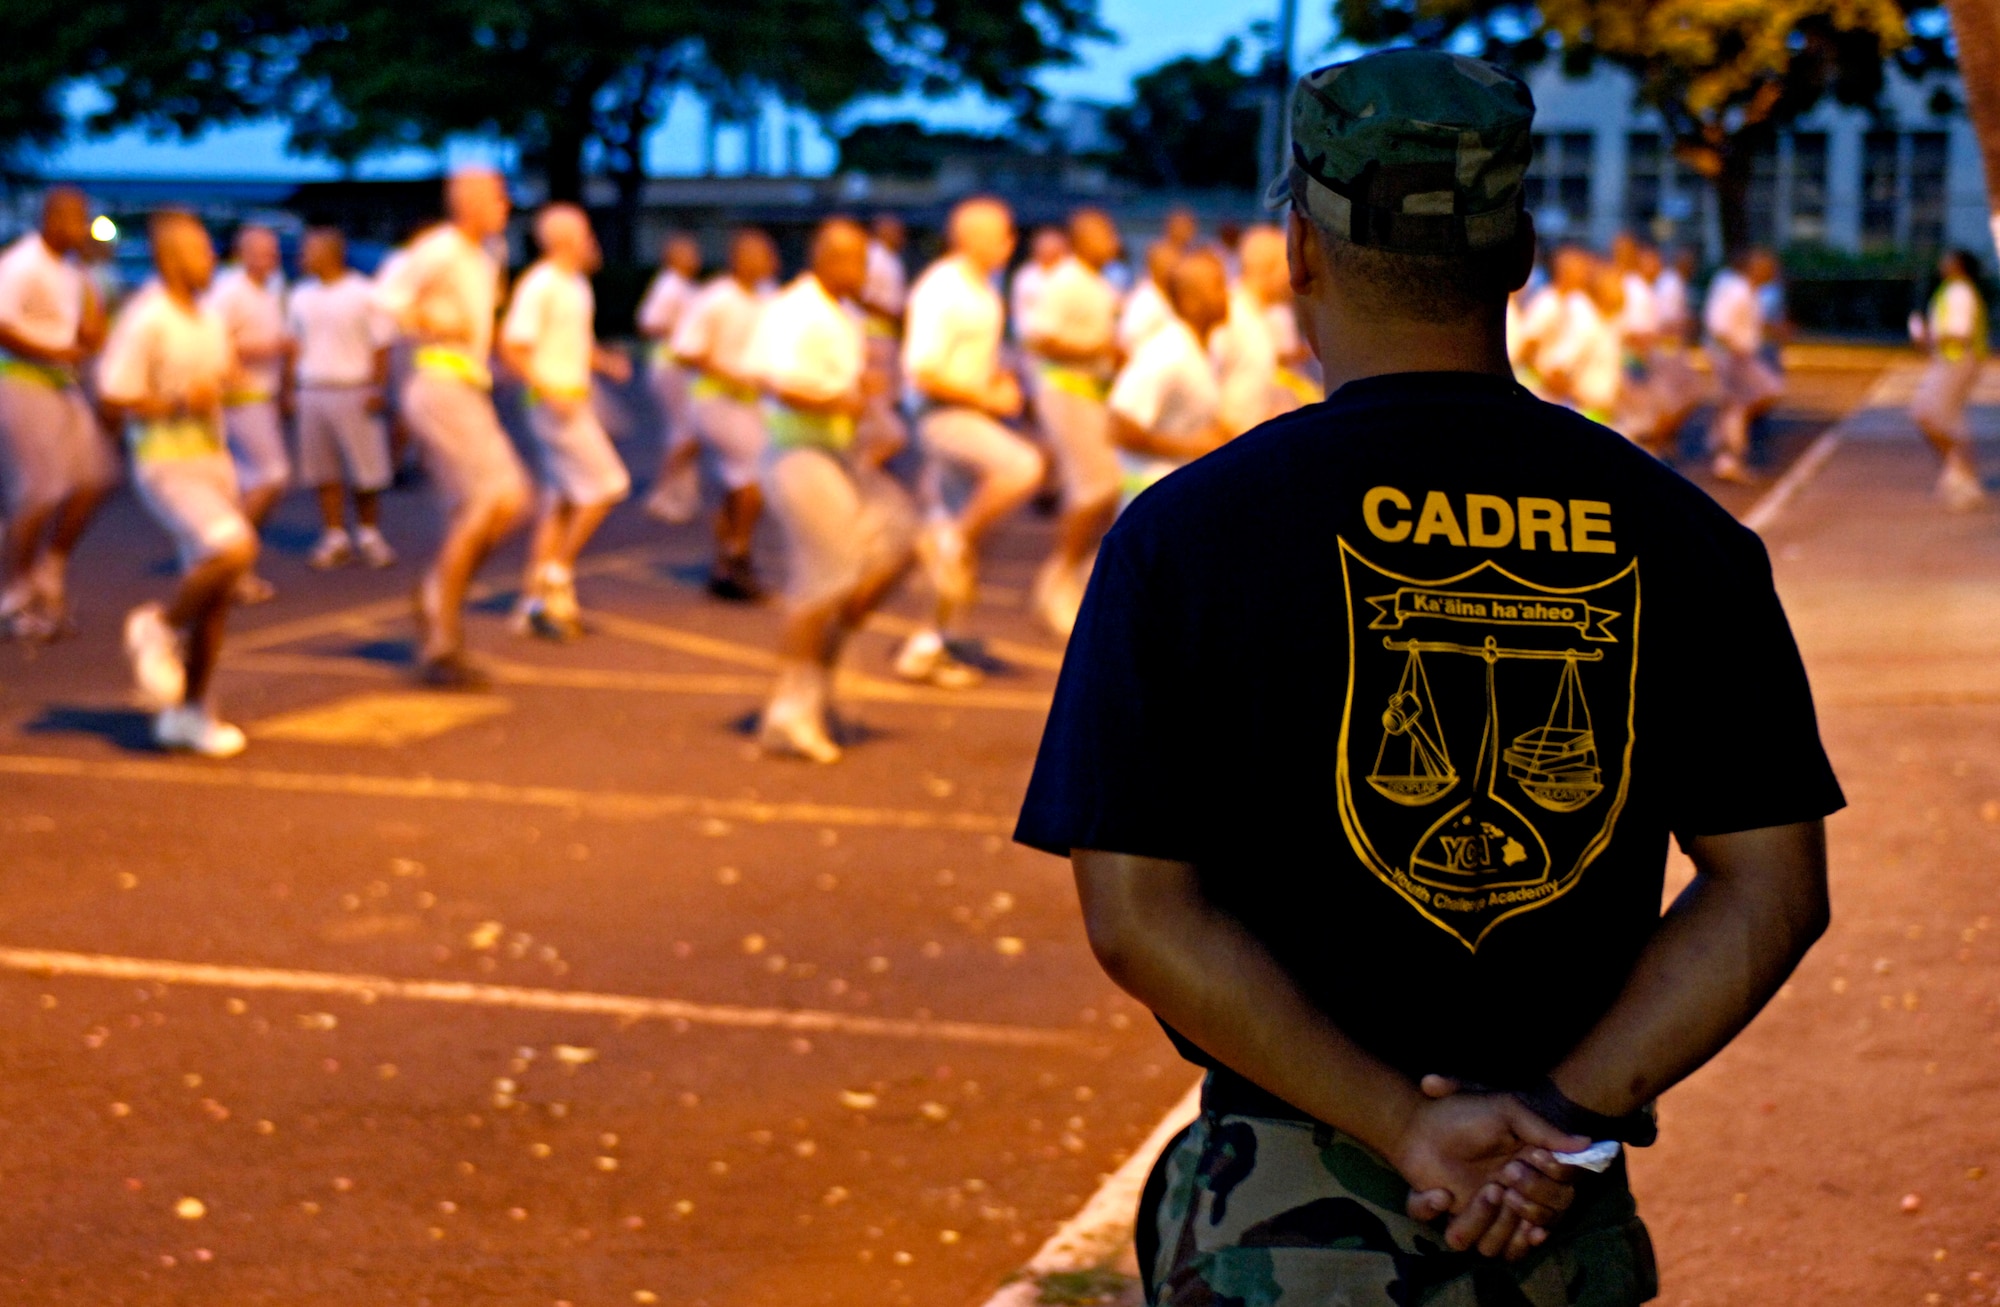 Staff Sgt. Alika Kaahanui watches over cadets as they perform their morning physical exercise on Thursday, May 18, 2006 at the Hawaii National Guard Youth Challenge Academy in Kapolei, Hawaii. The academy staff teach life skills to non-traditional students so they can be successful in the community and earn a high school diploma.  (U.S. Air Force photo/Tech. Sgt. Shane A. Cuomo)